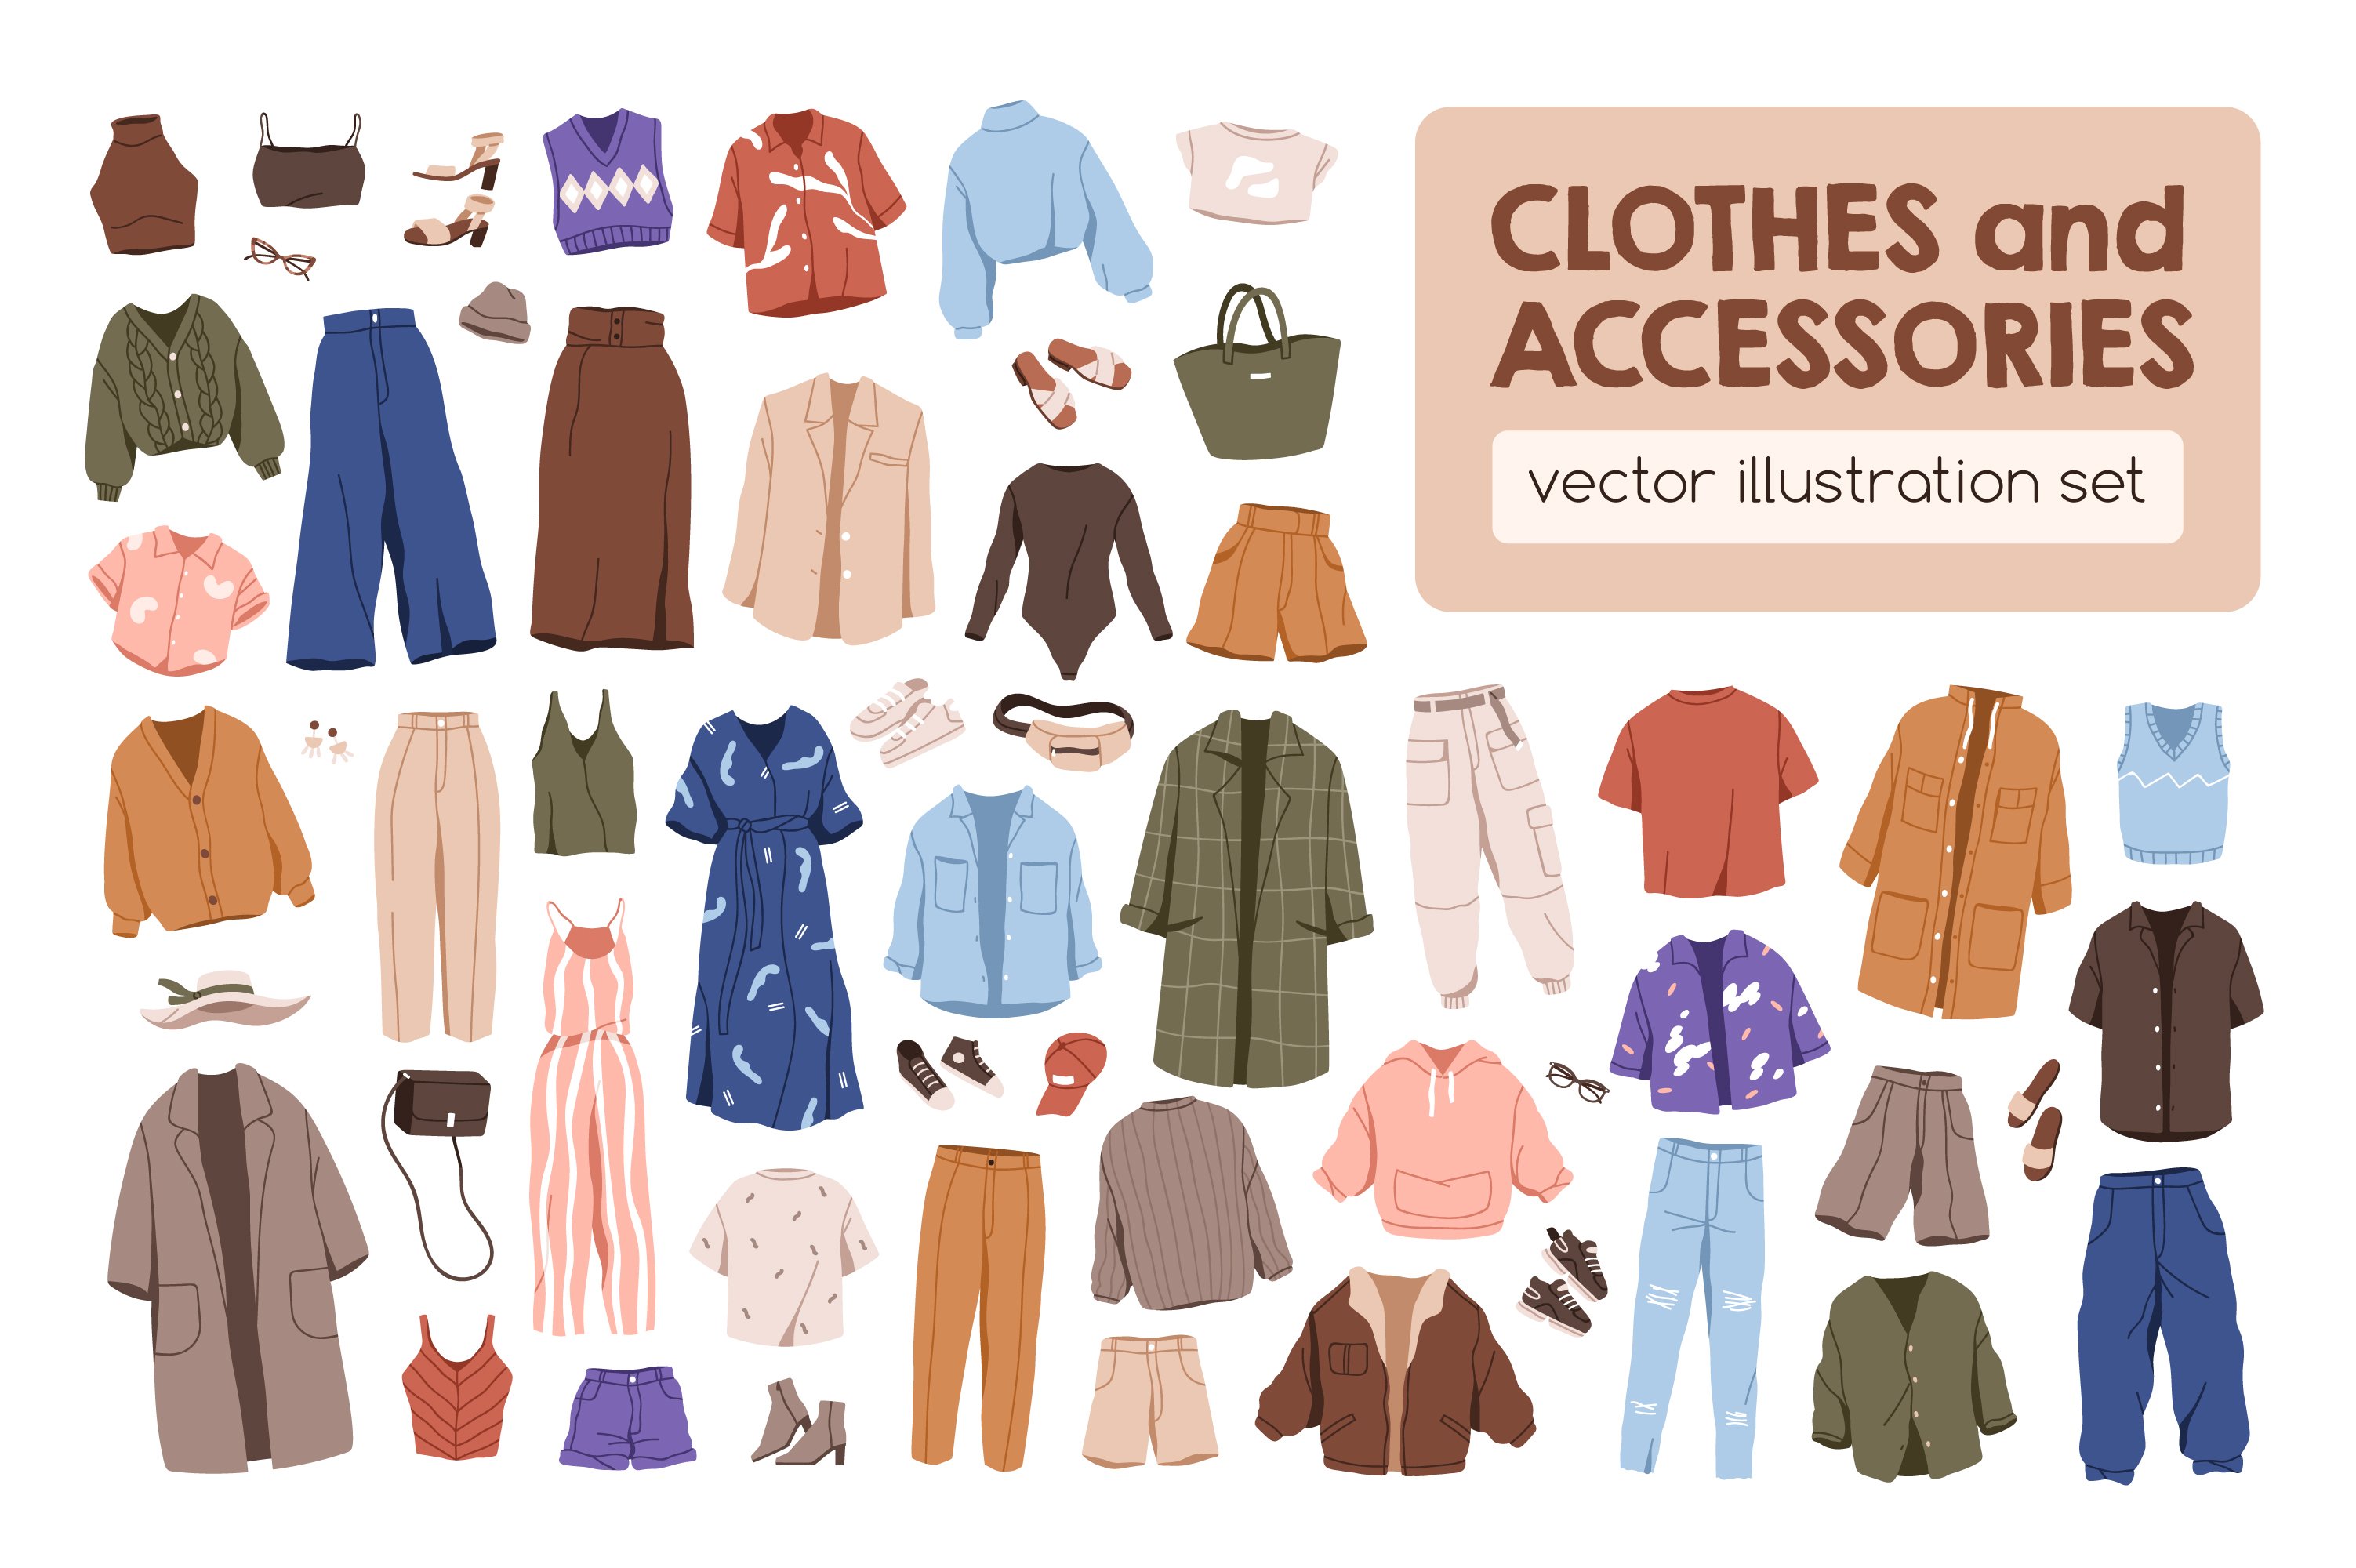 Fashion clothes & accessories set cover image.